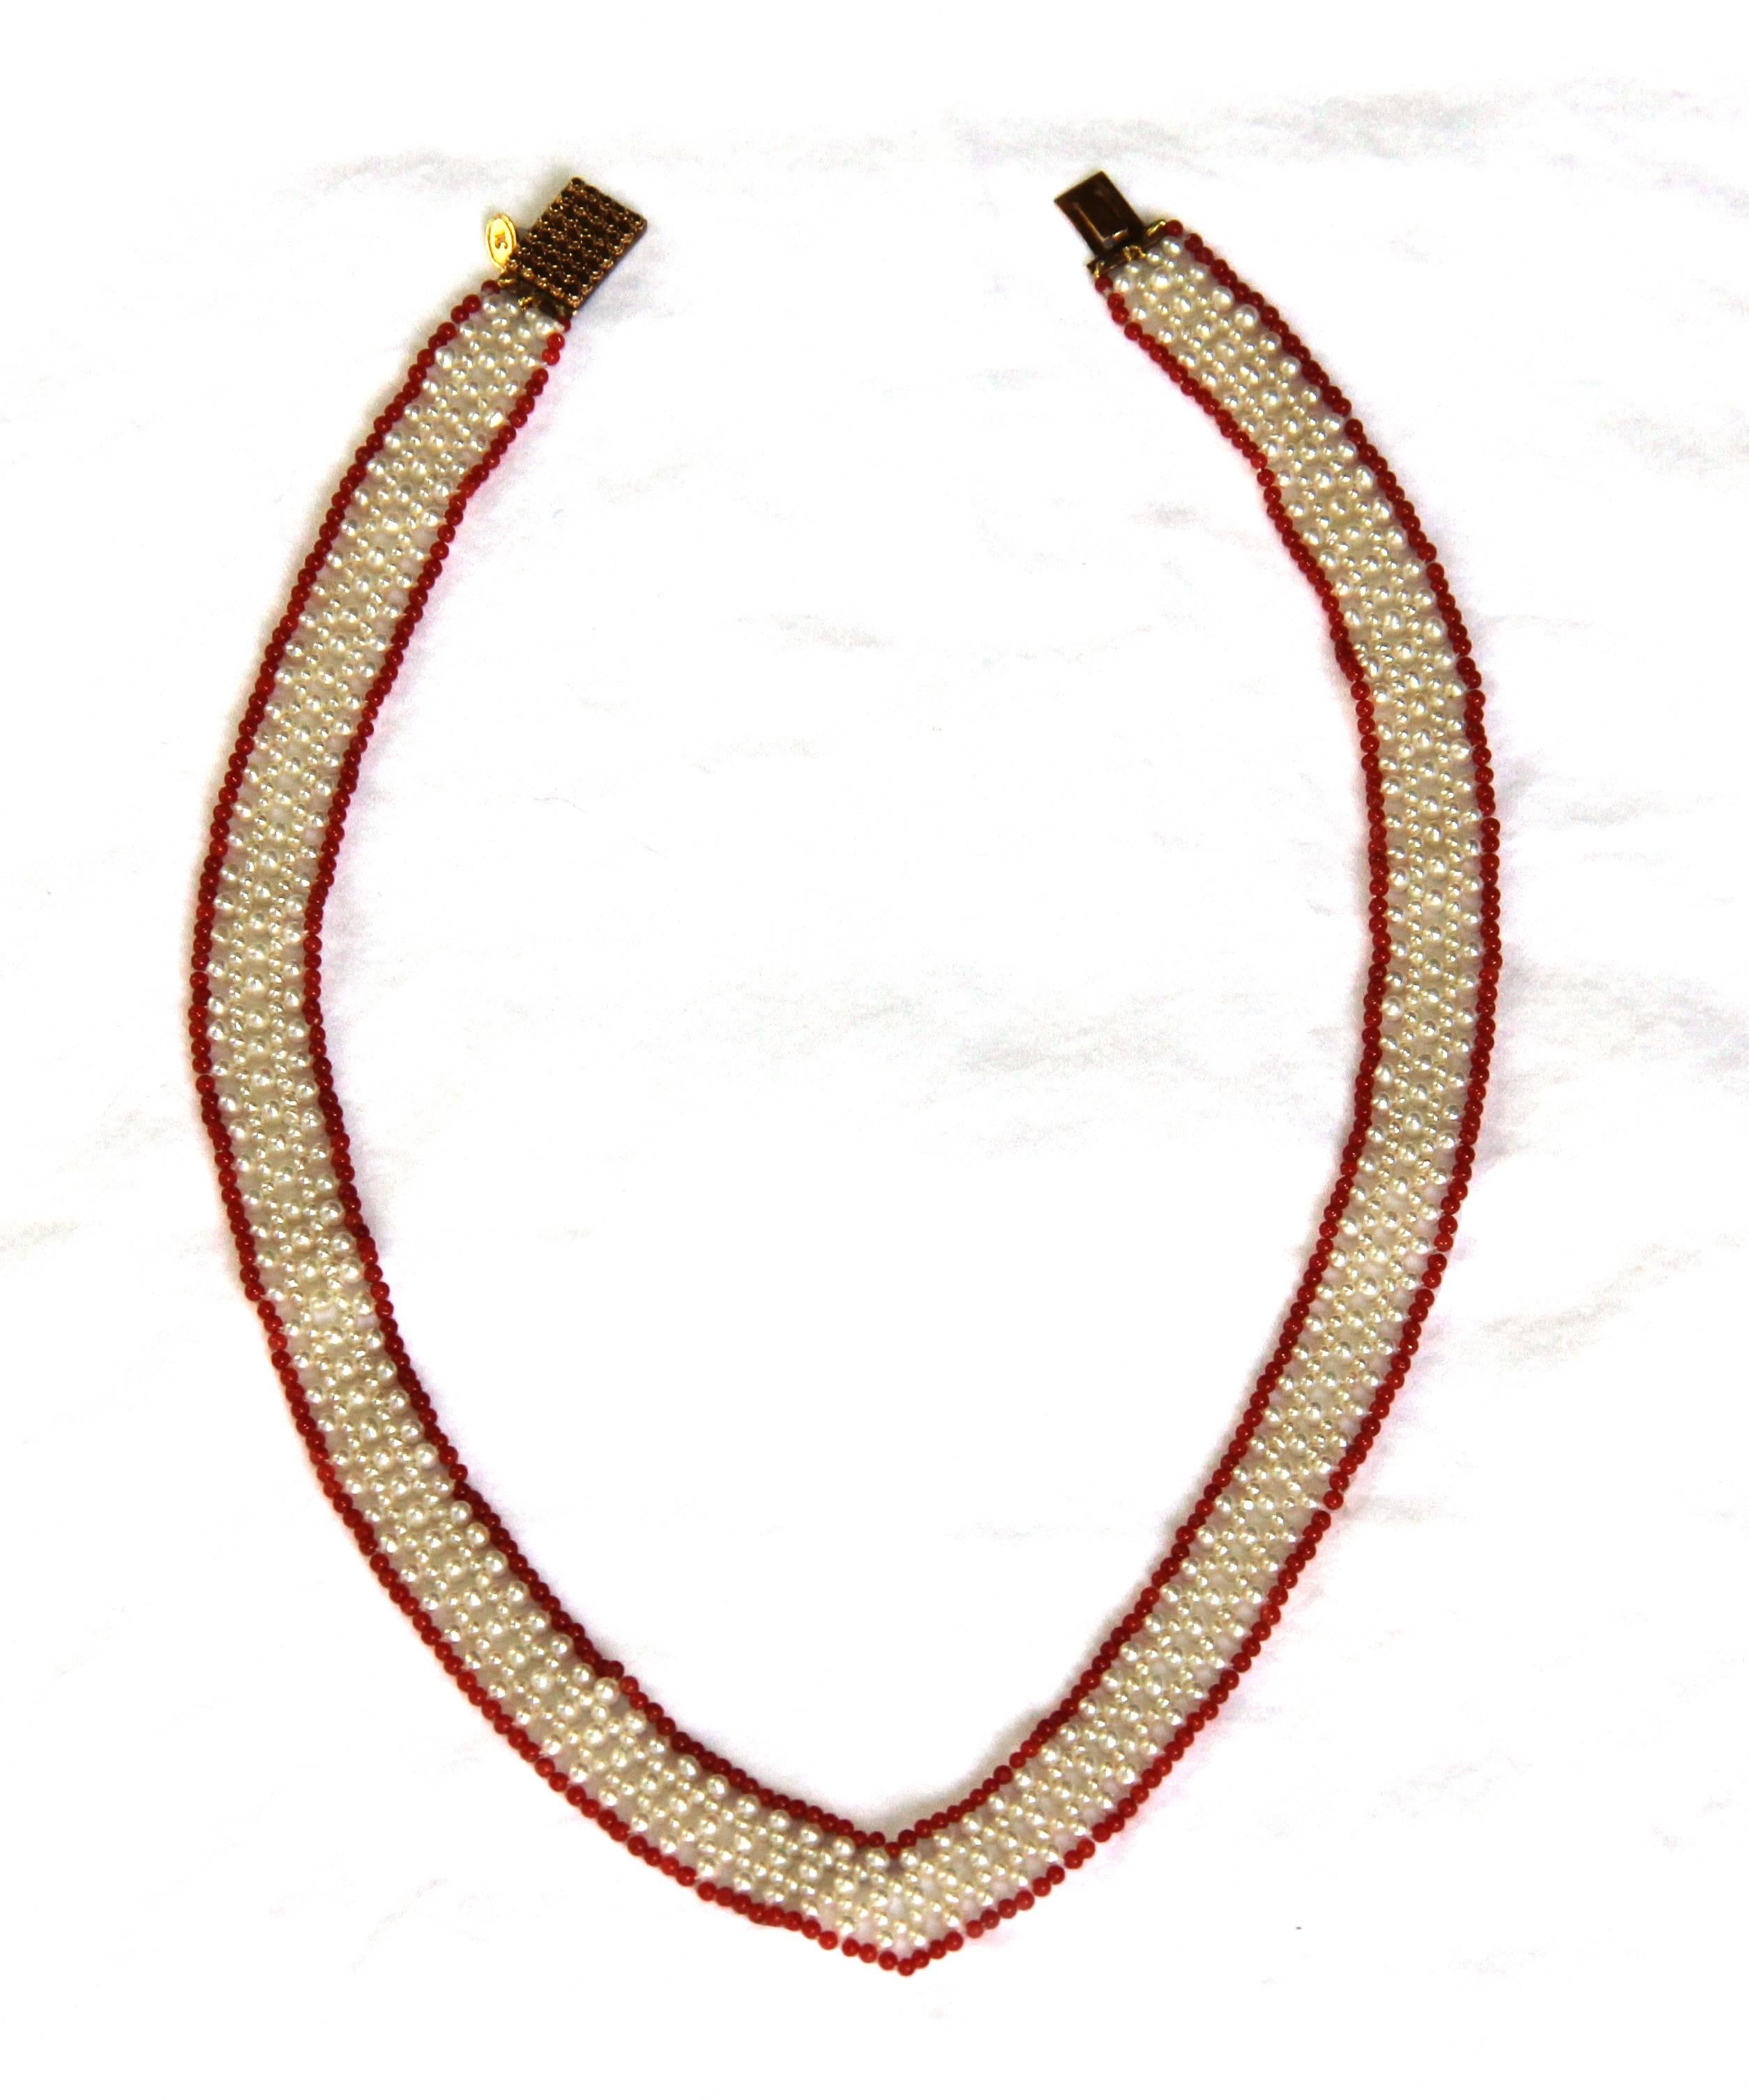 This beautiful V Shaped necklace is designed to lengthen neck neckline by creating a delicate heart-shaped curve around your neck. Intricately woven 1-2 mm white pearls and 1 mm coral beads are joined by a uniquer vintage 14k gold clasp. This day or